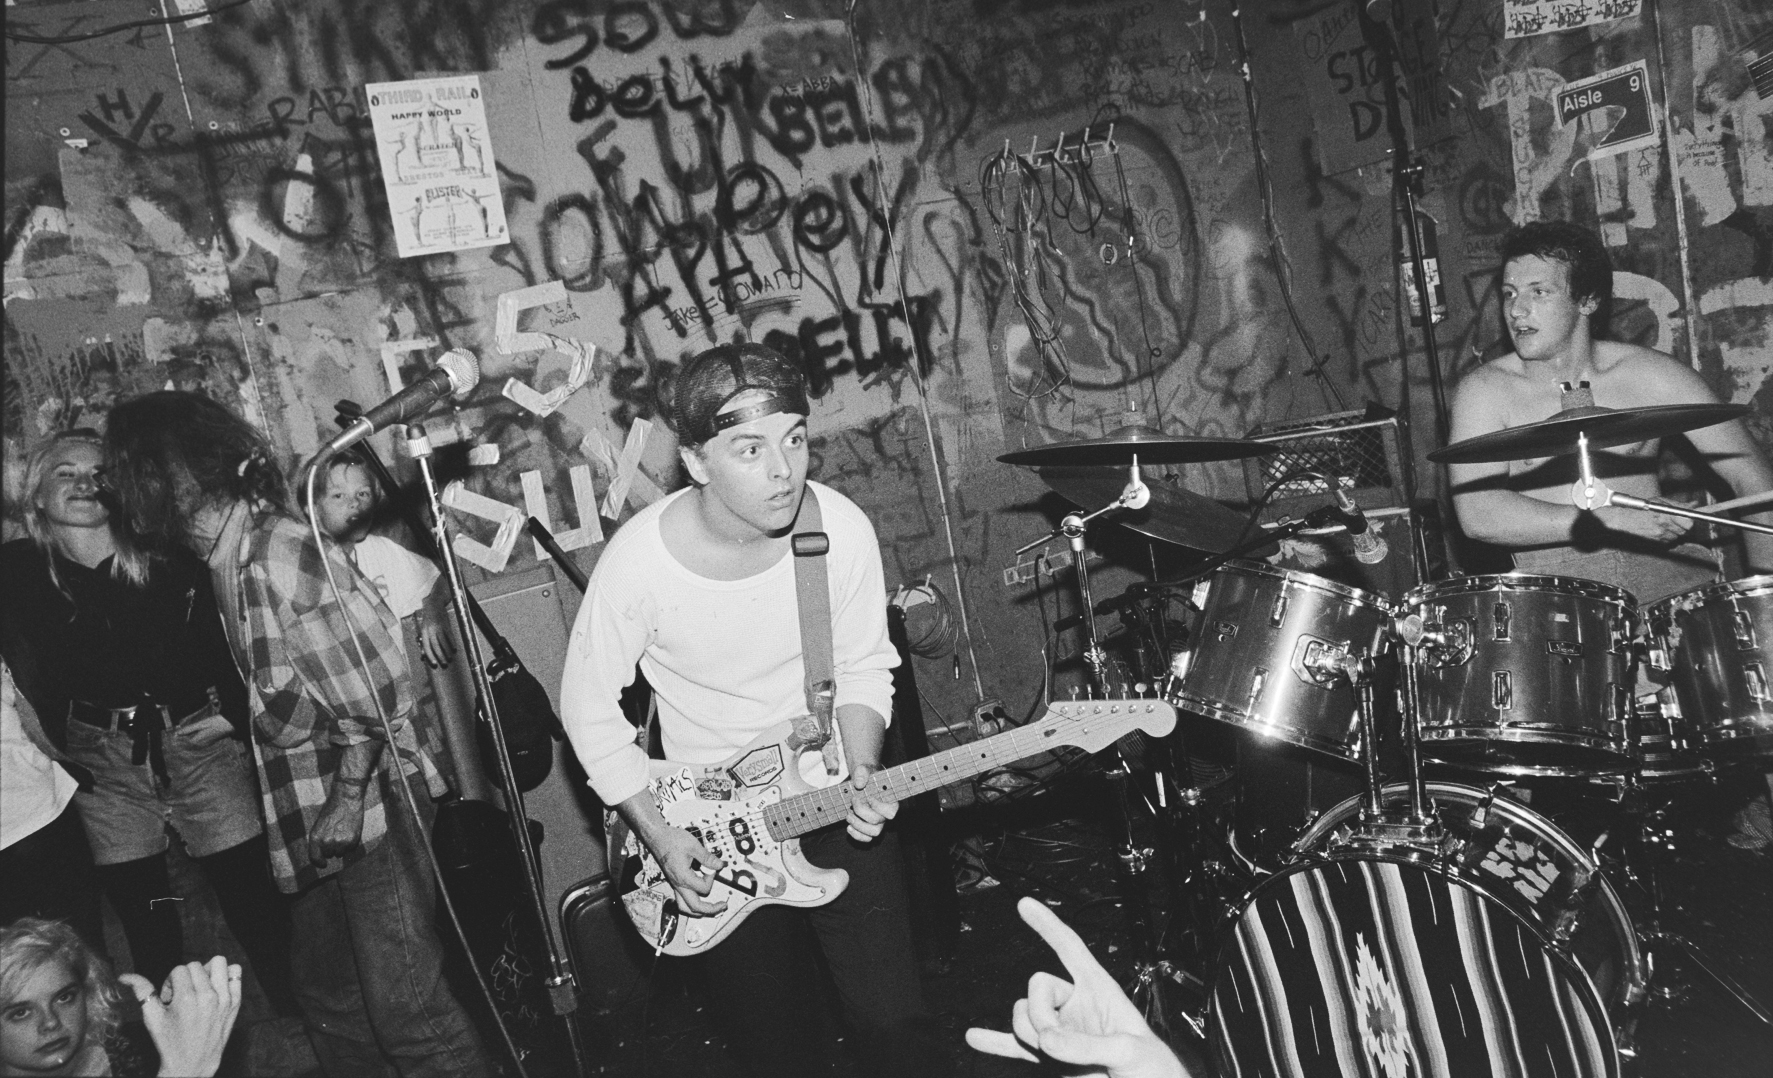 Green Day performs at 924 Gilman Street on Oct. 26, 1990 in Berkeley, Calif.